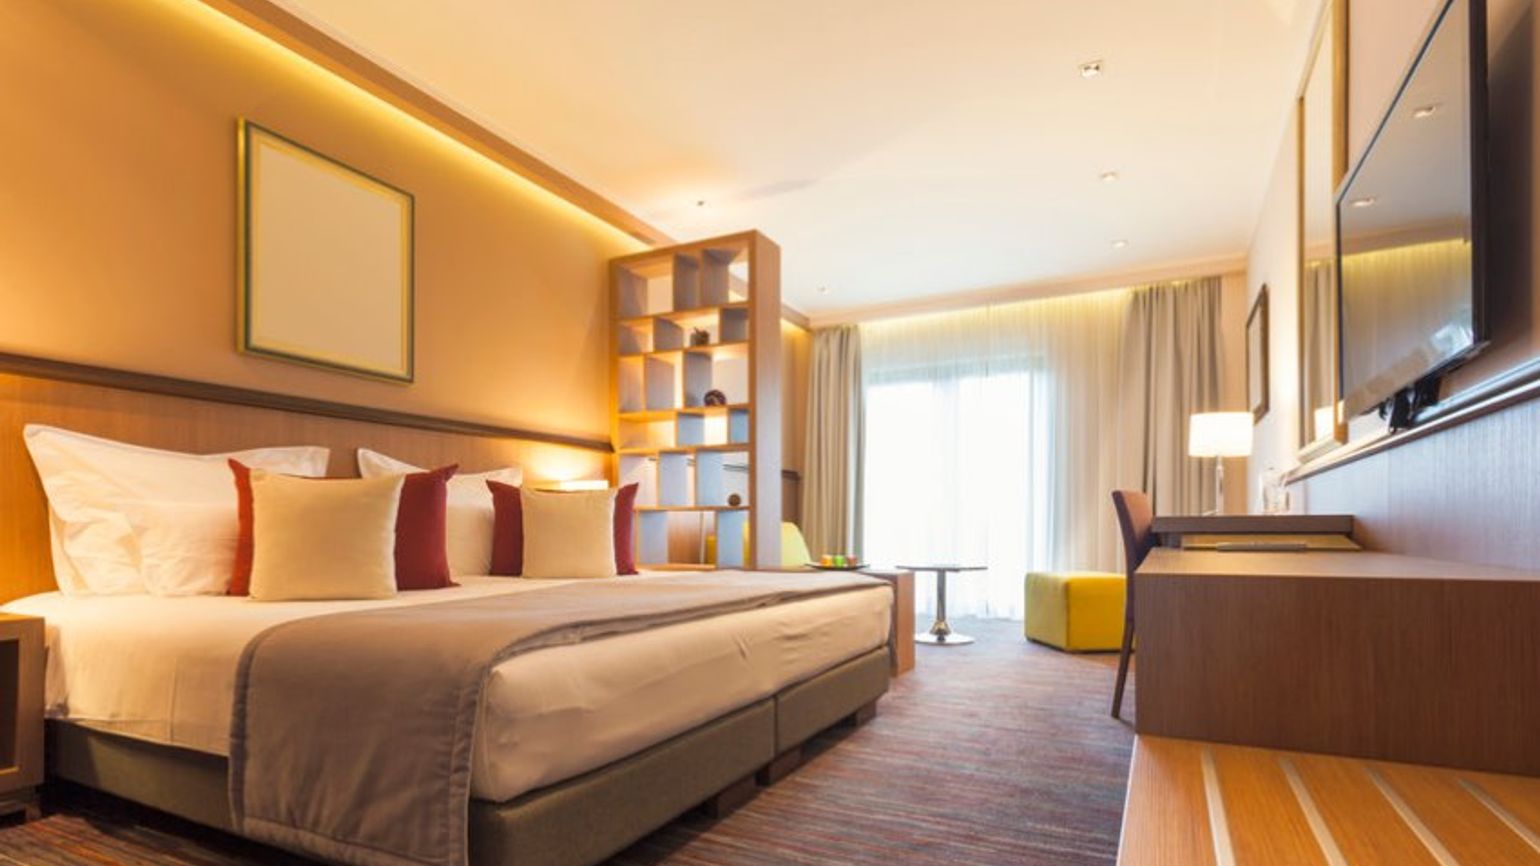 European hotel bookings exceed pre-Covid levels